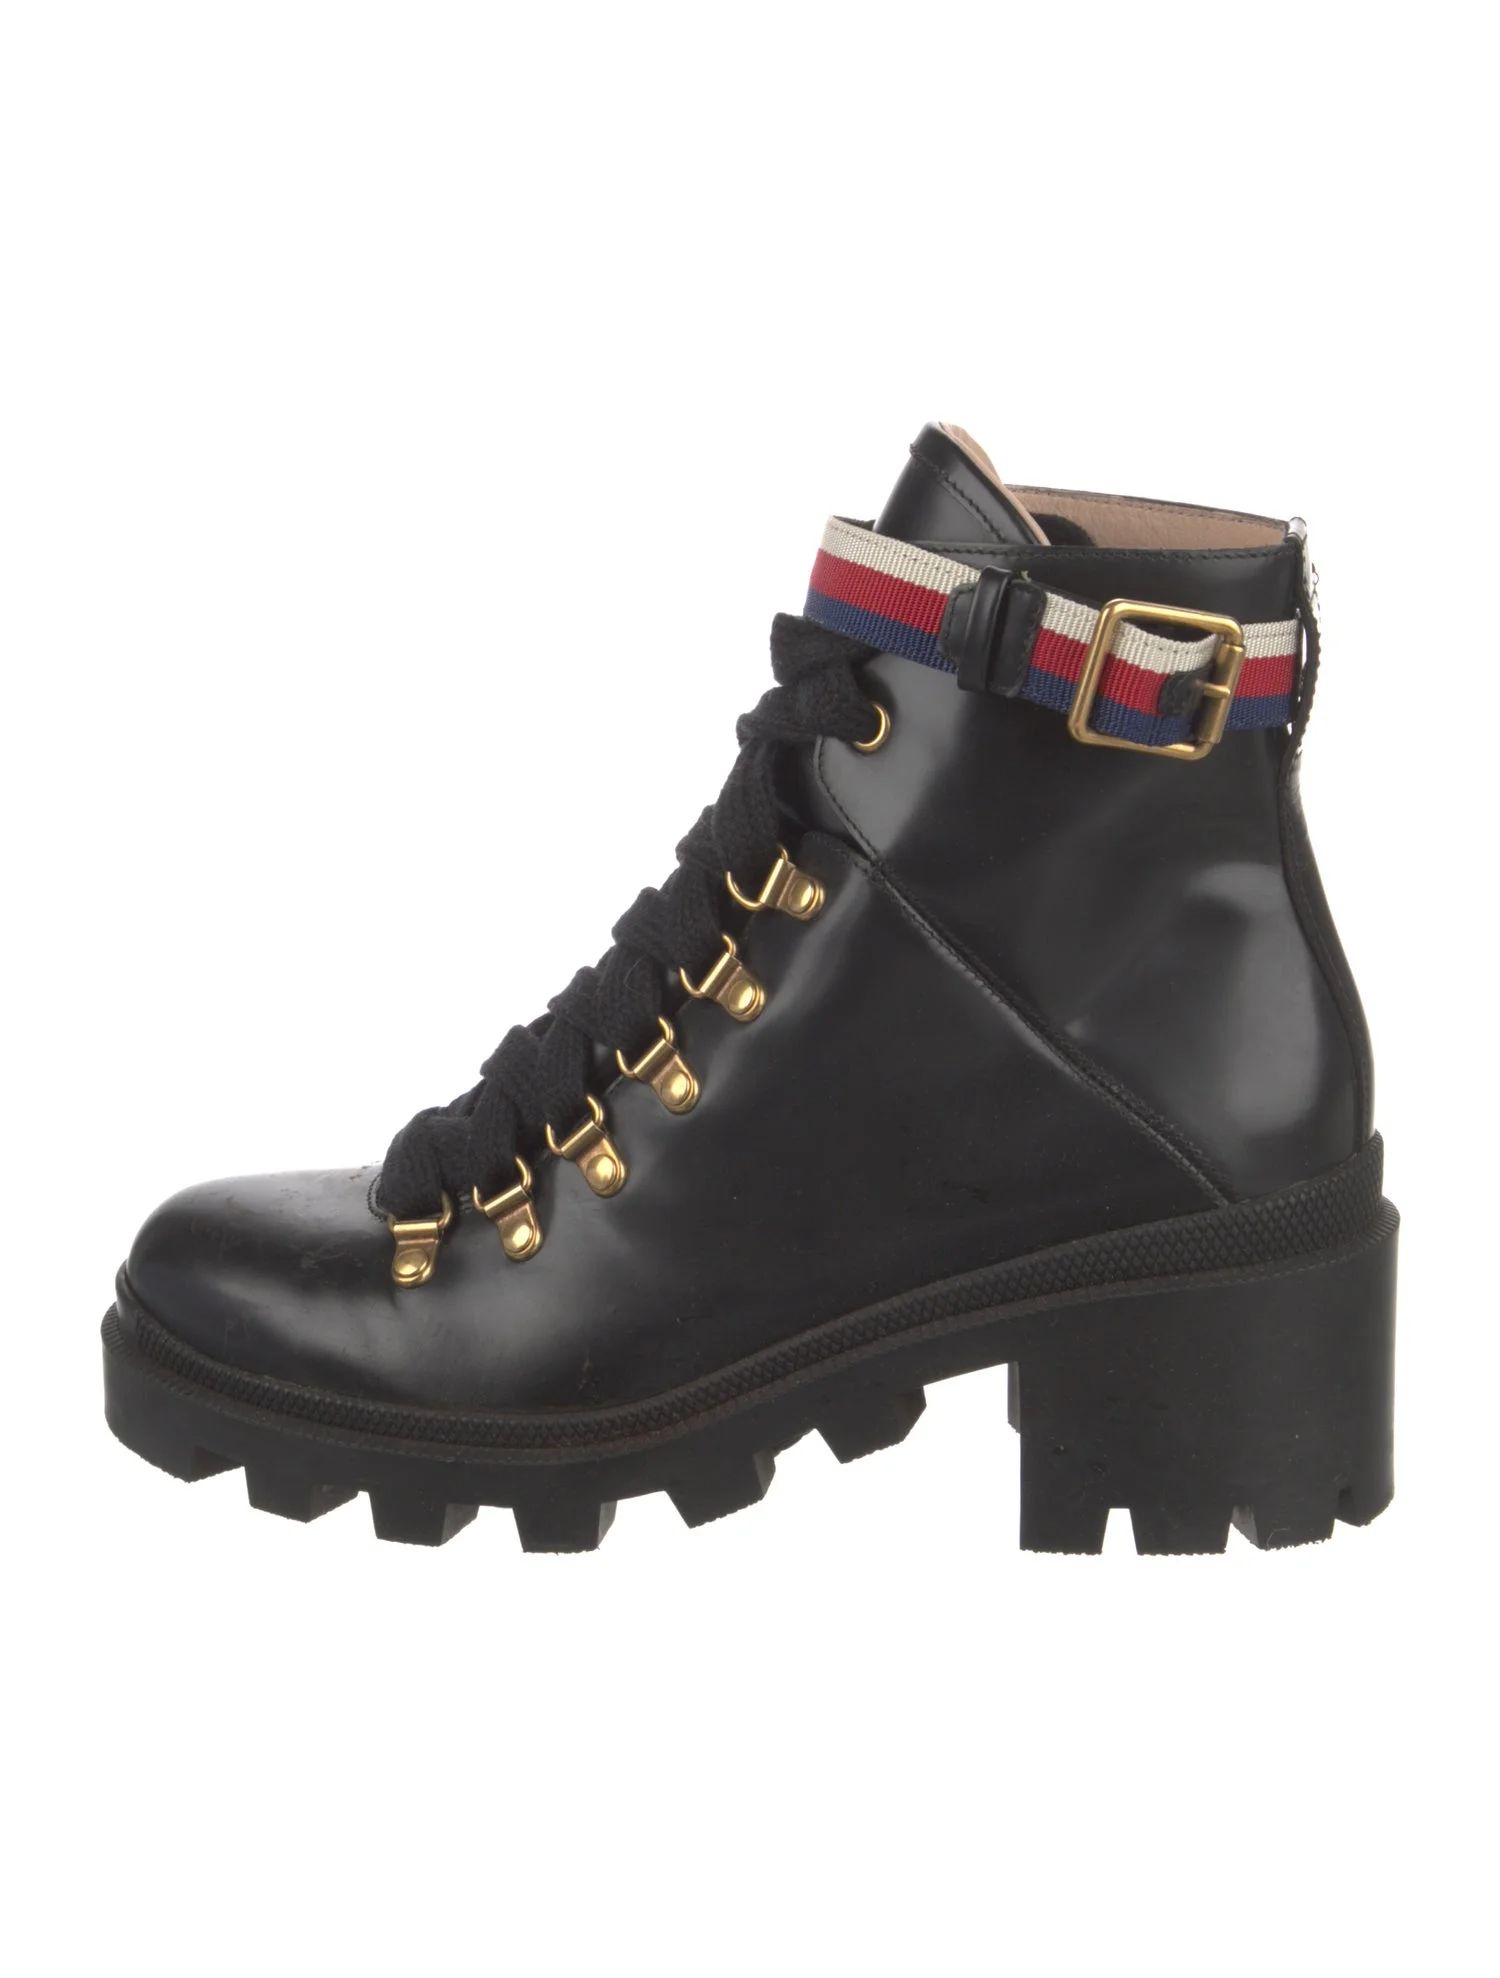 Patent Leather Striped Combat Boots | The RealReal